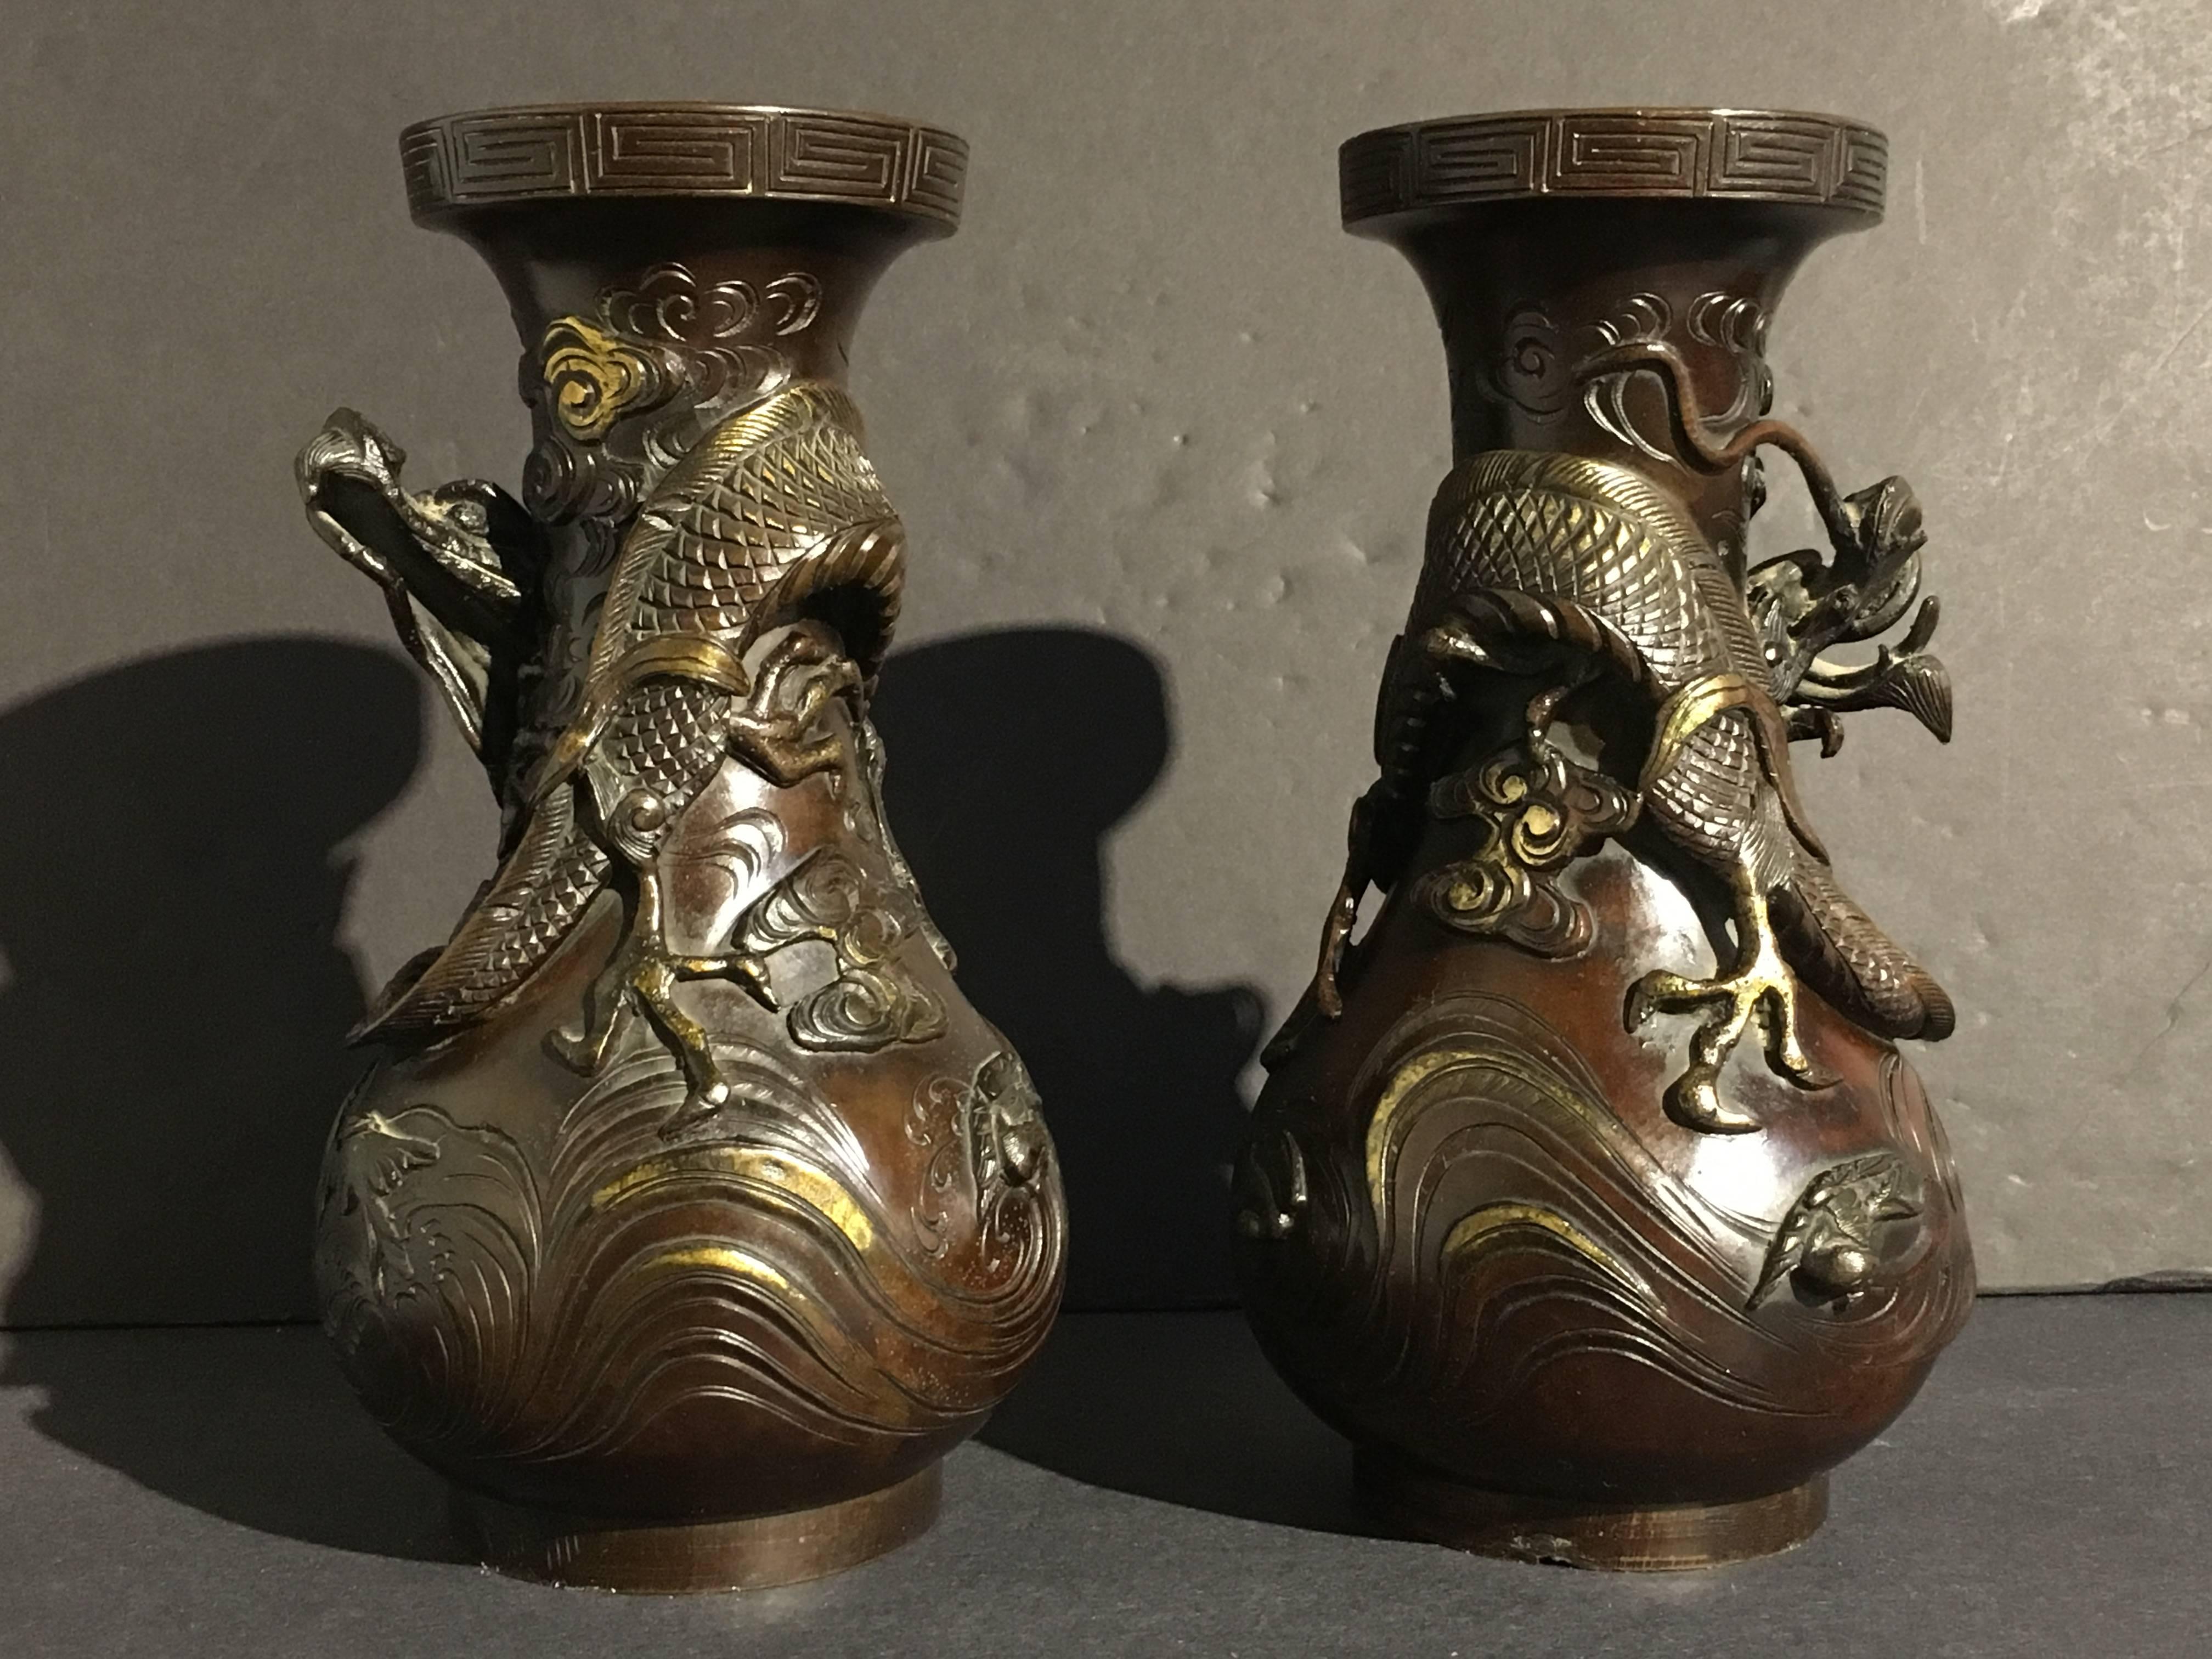 A pair of well cast and dramatic Japanese parcel gilt bronze dragon vases, Edo period, early 19th century. The heavy bronze vases of pear shape, each with a single writhing dragon cast in high relief dancing in the clouds. Under the dragons,